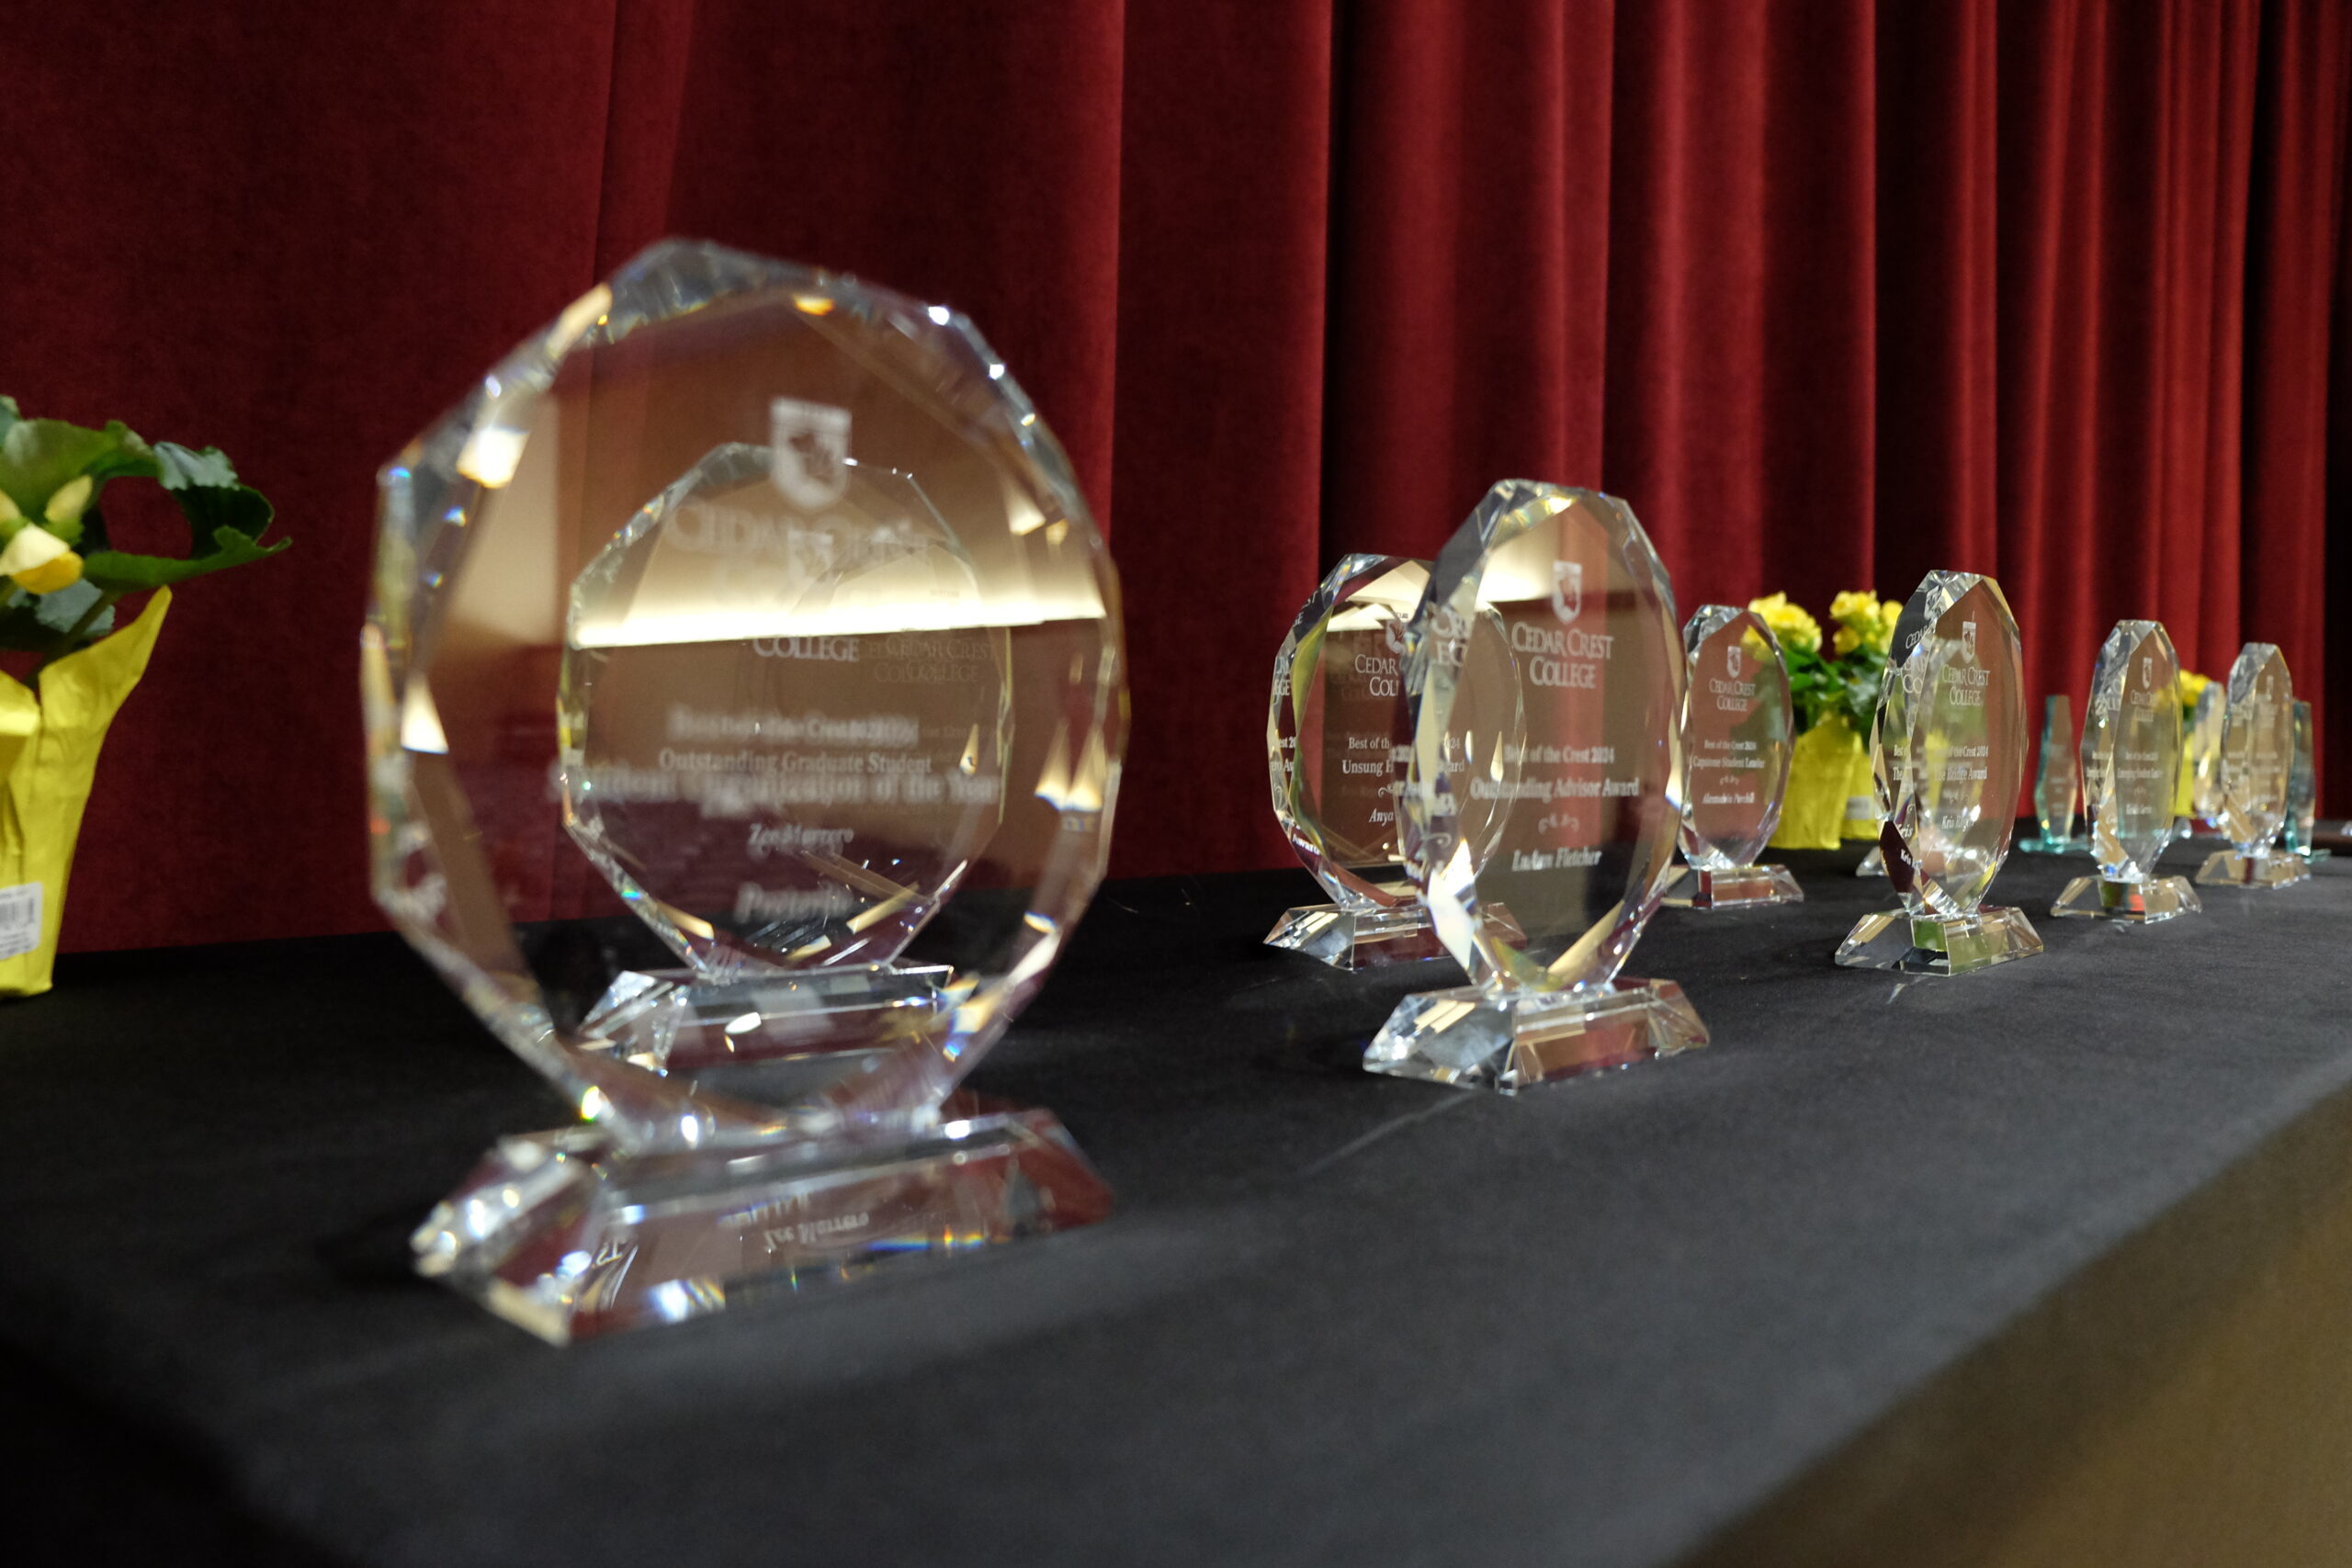 Glass awards inscribed with the Cedar Crest College crest